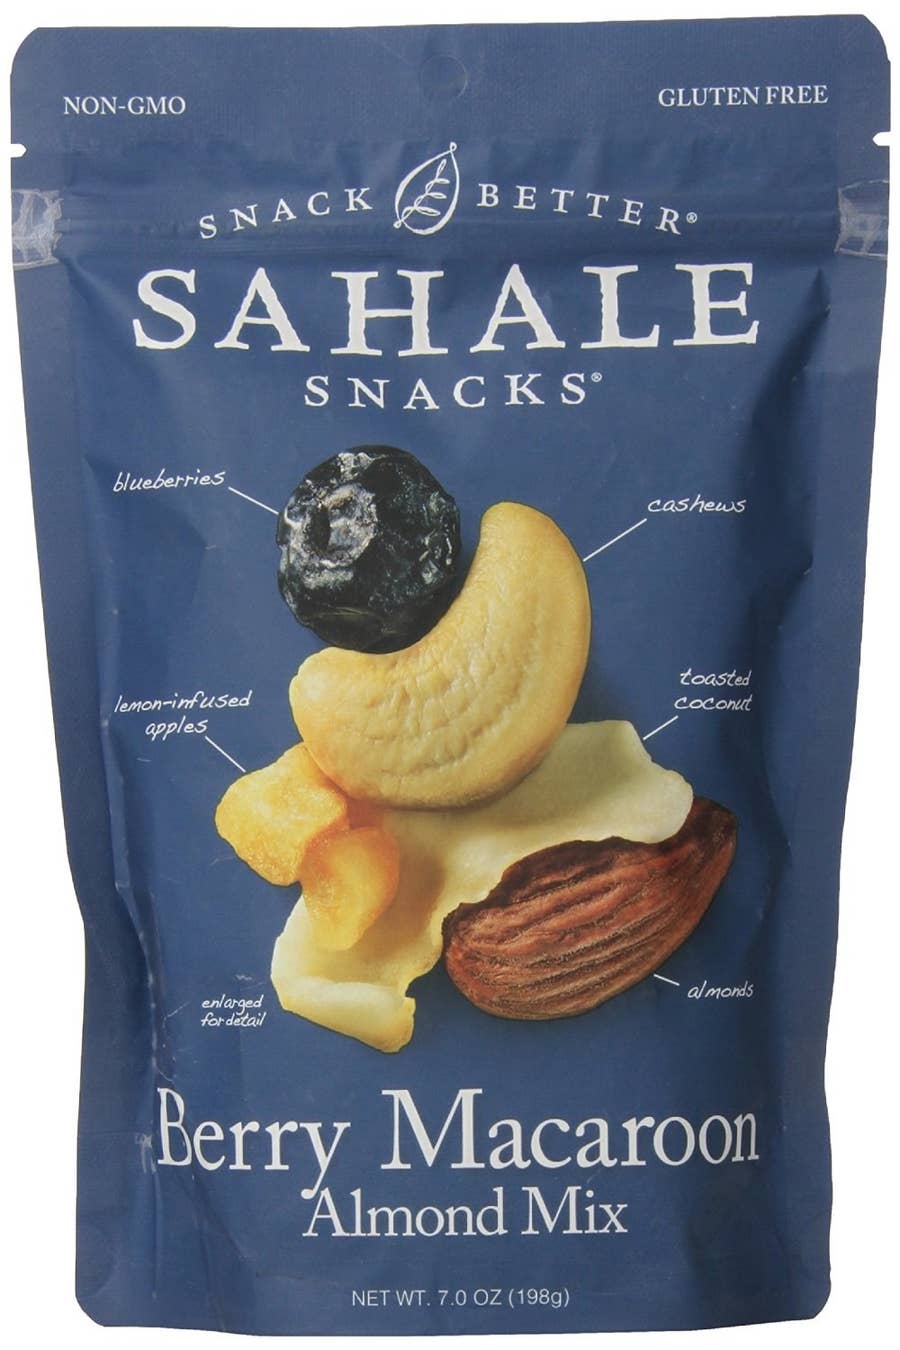 21 Insanely Delicious Snacks You Should Be Ordering From